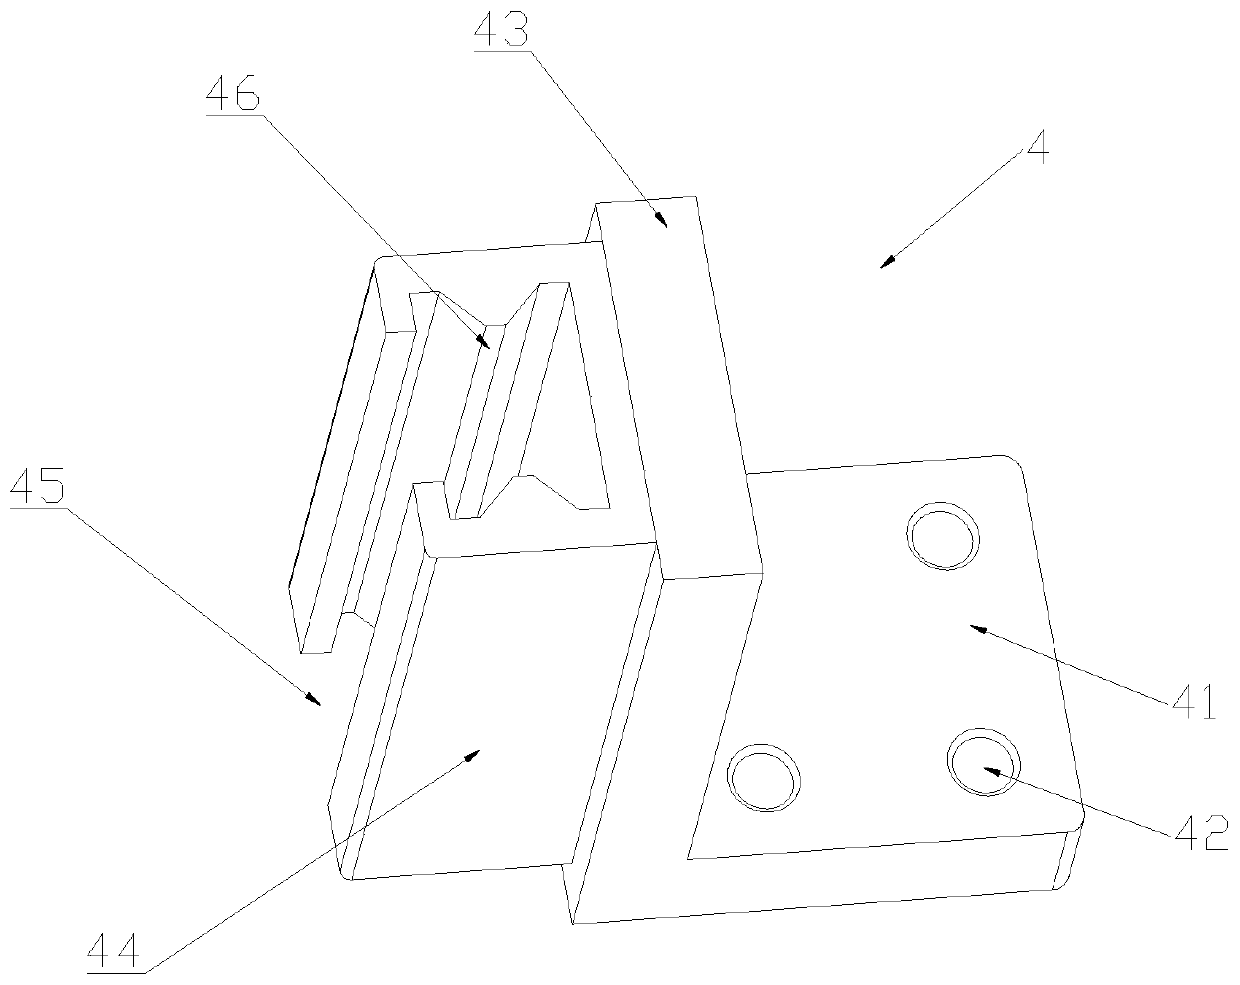 Hollow square-shaped adhesive pressing fixture